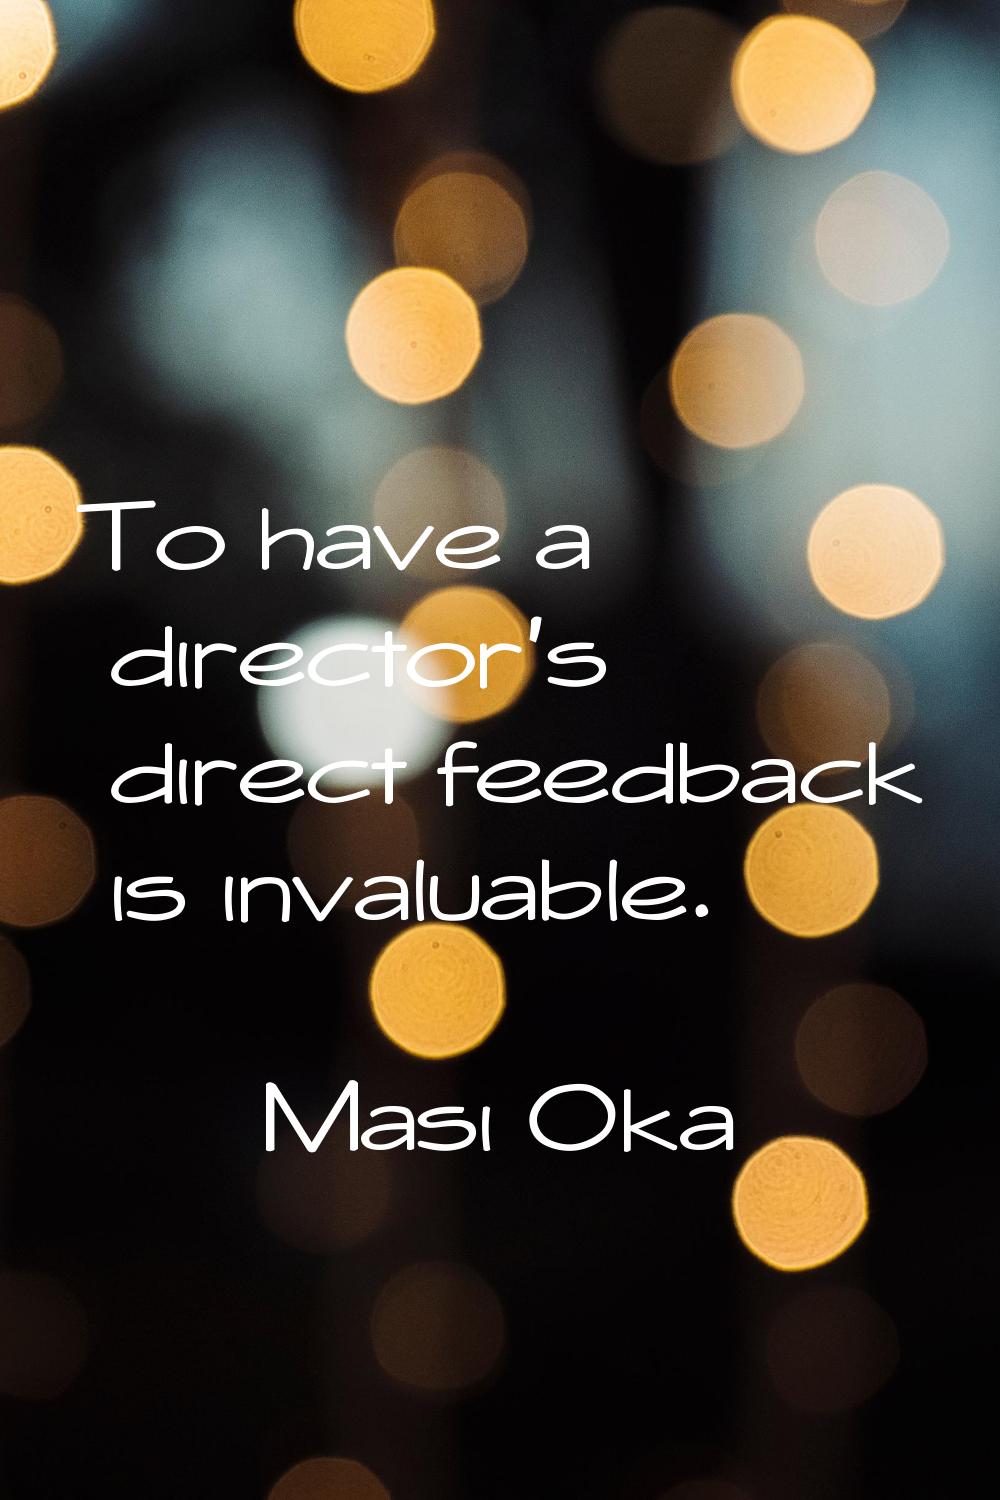 To have a director's direct feedback is invaluable.